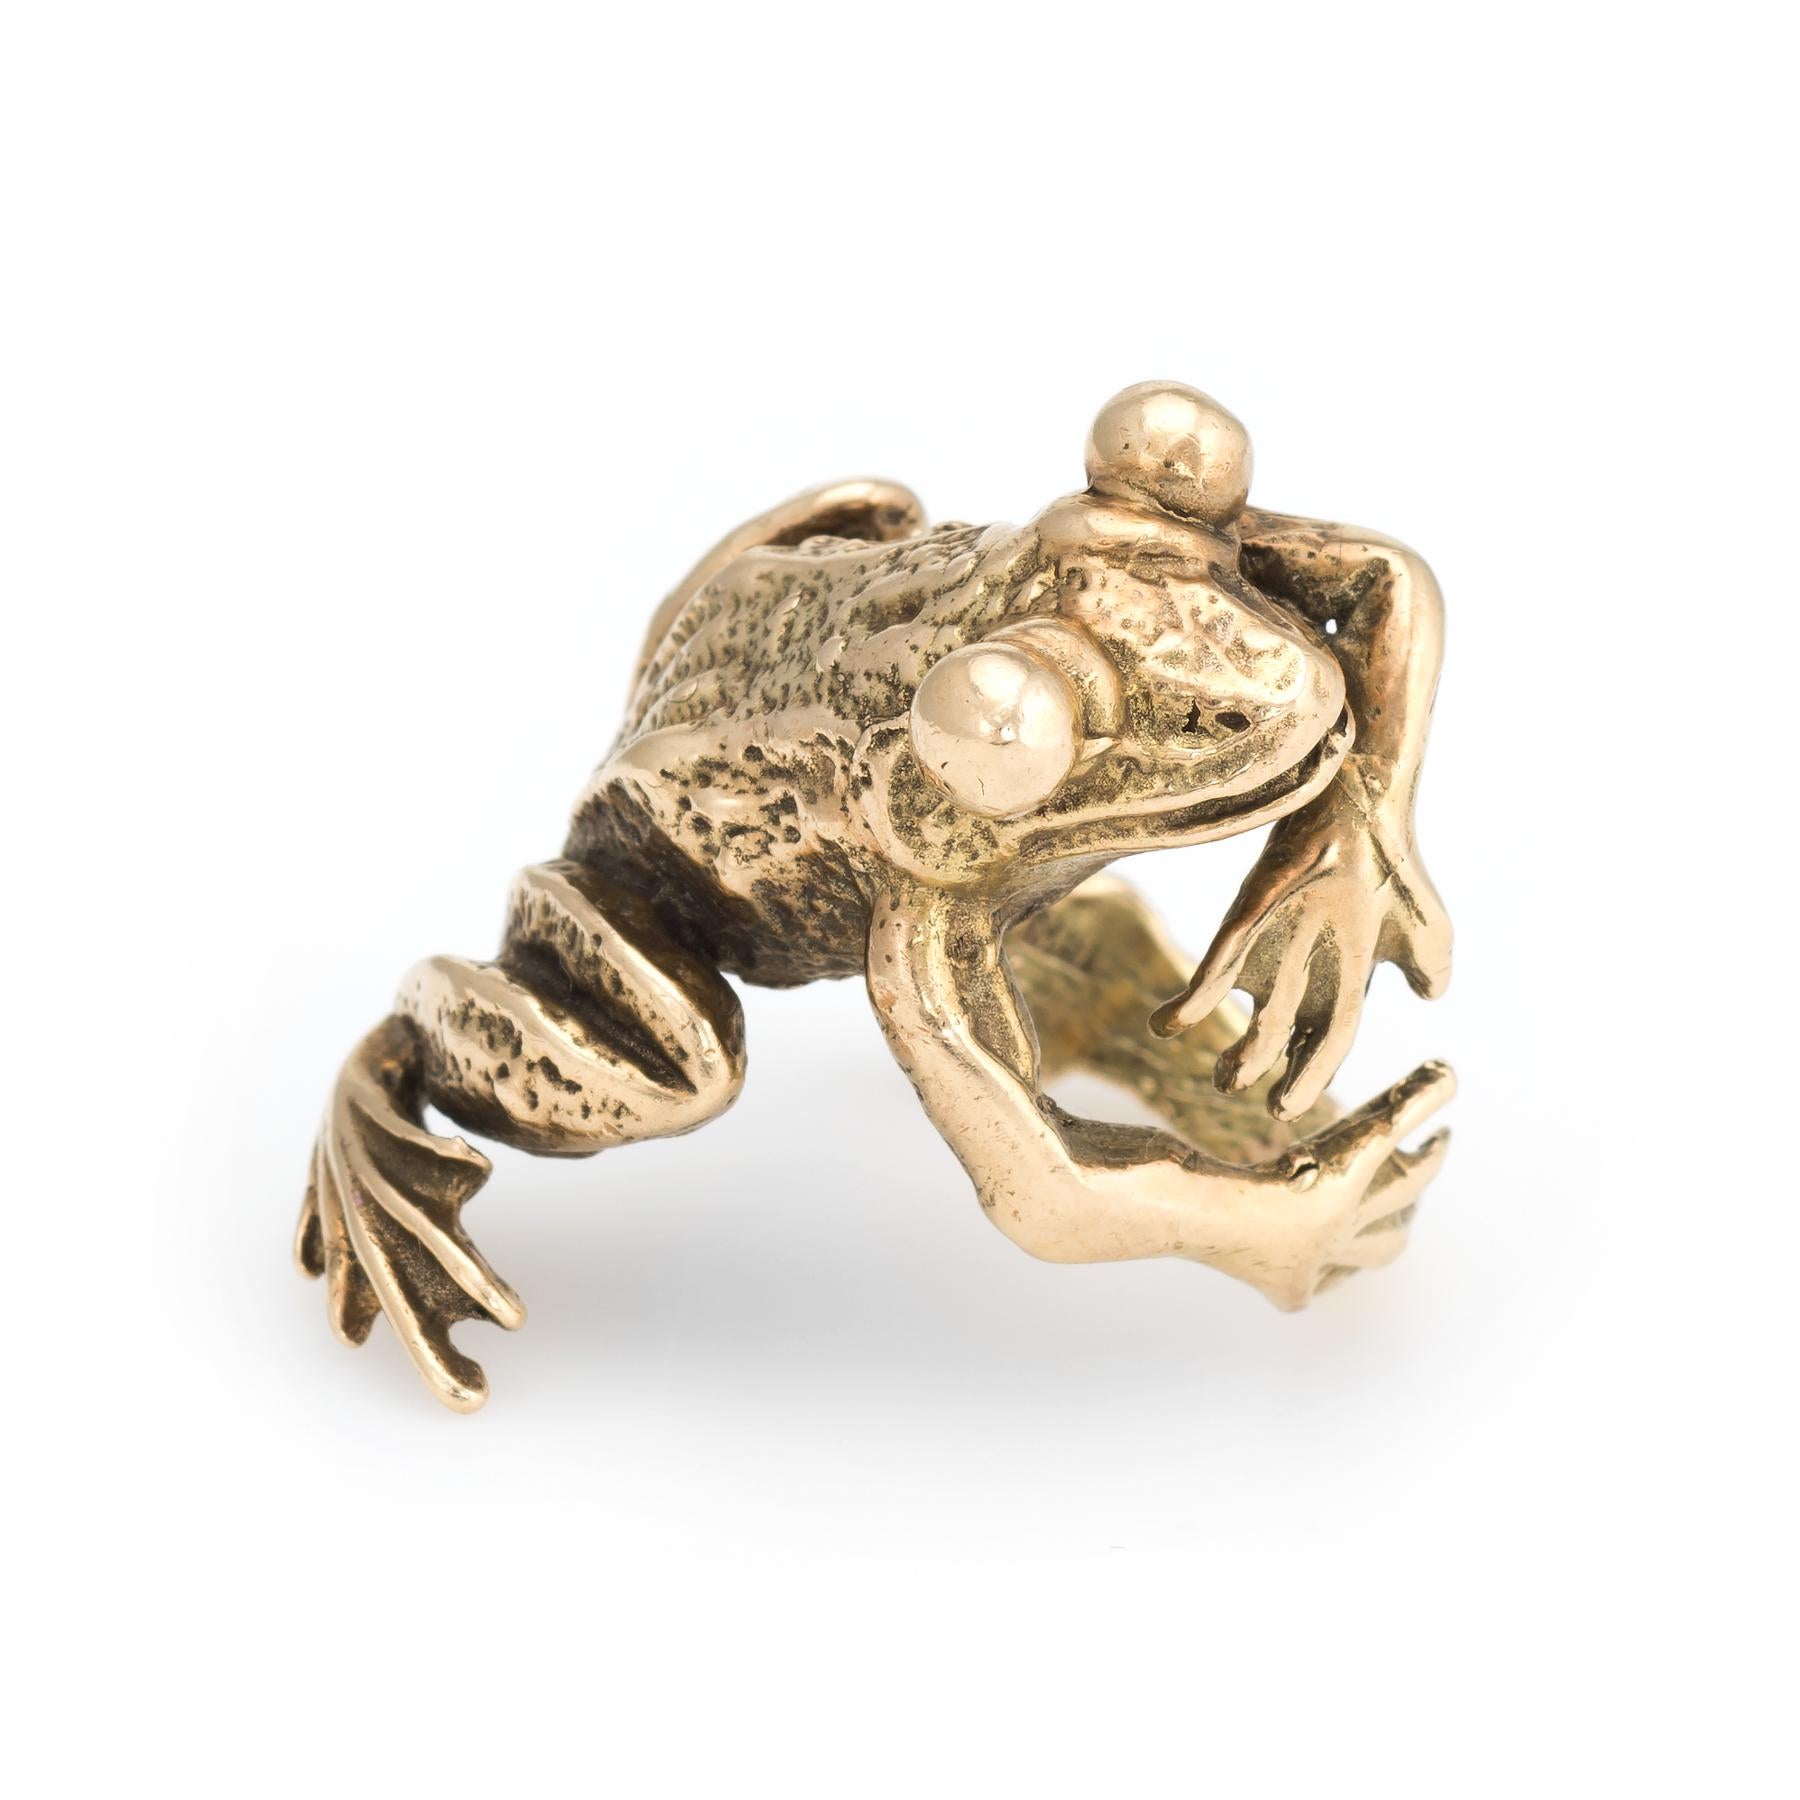 Finely detailed vintage frog cocktail ring (circa 1960s to 1970s), crafted in 14 karat yellow gold. 

The distinct and charming frog is designed to hug the finger. The arms and legs casually wrap around the finger for a comfortable fit. The froggie